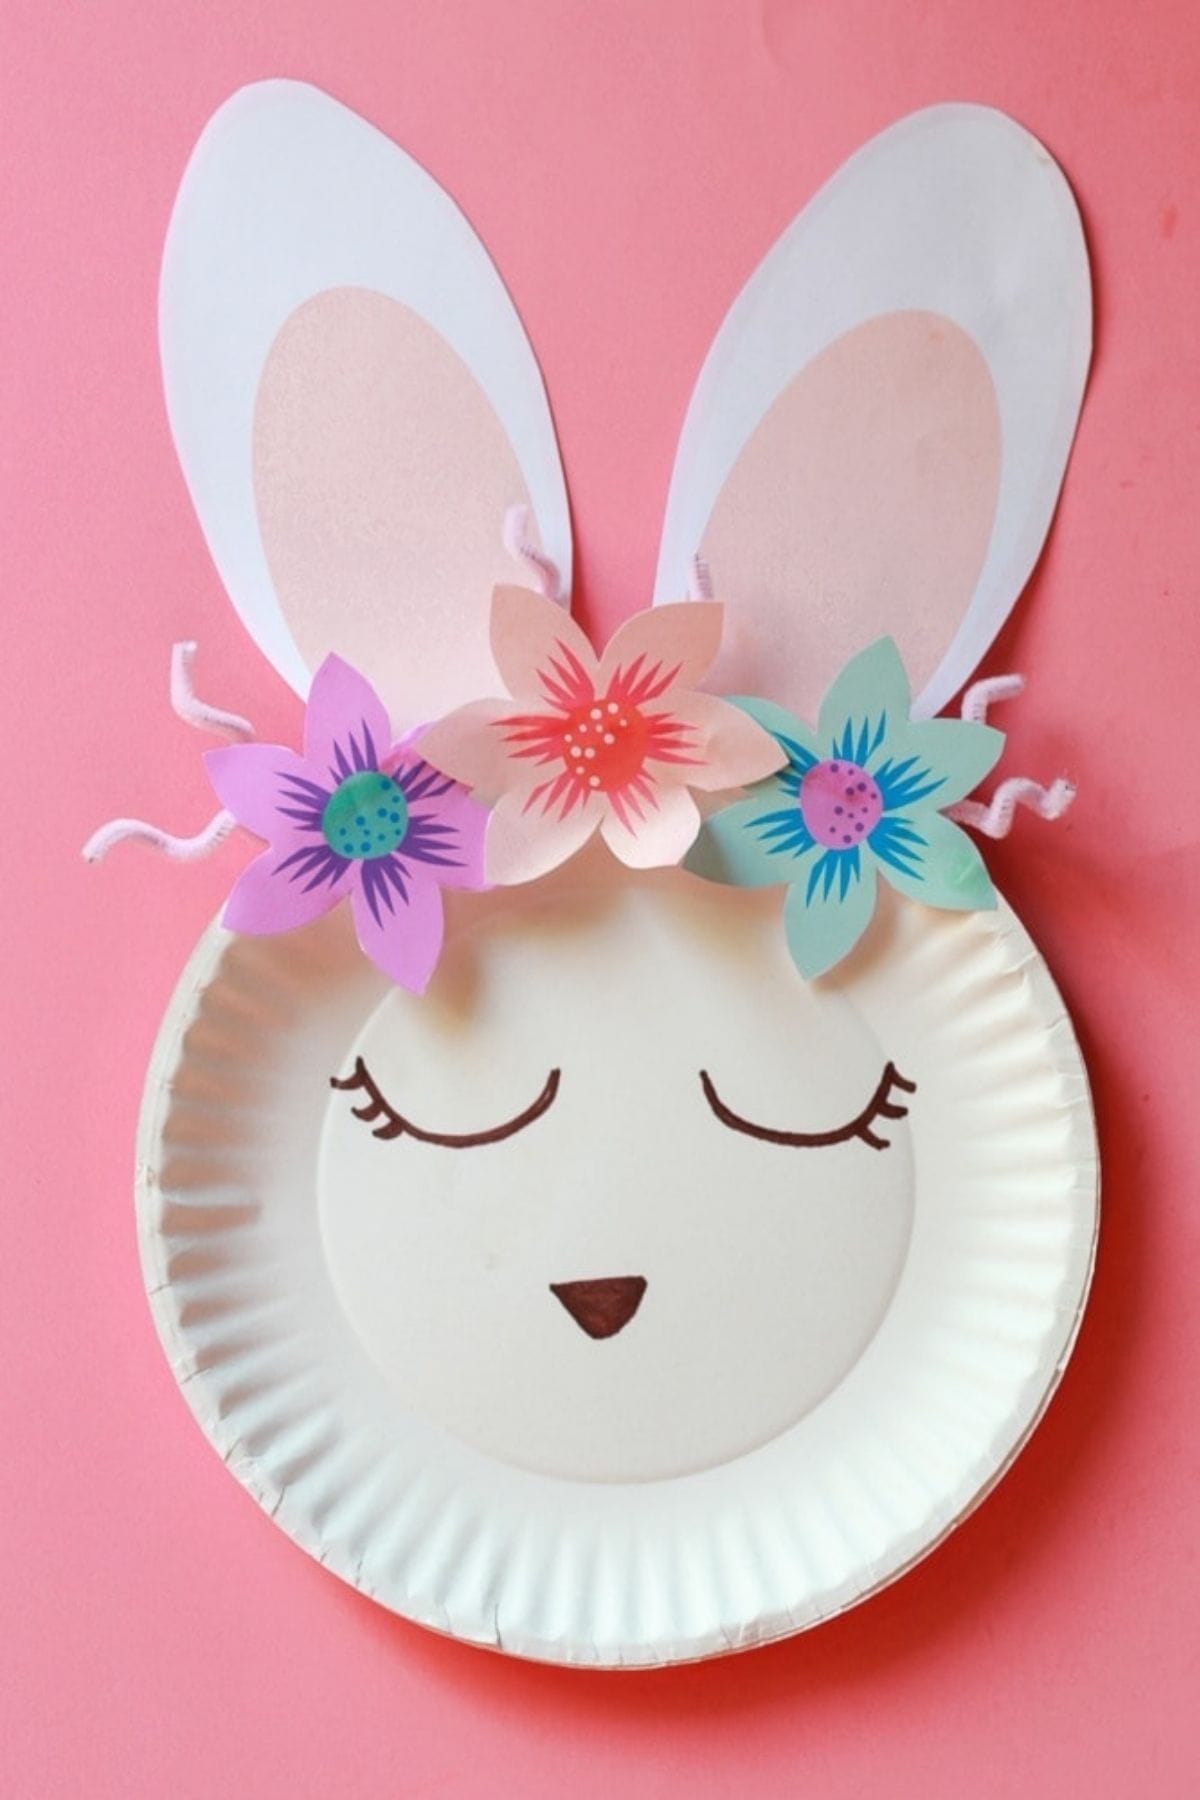 printable easter craft template